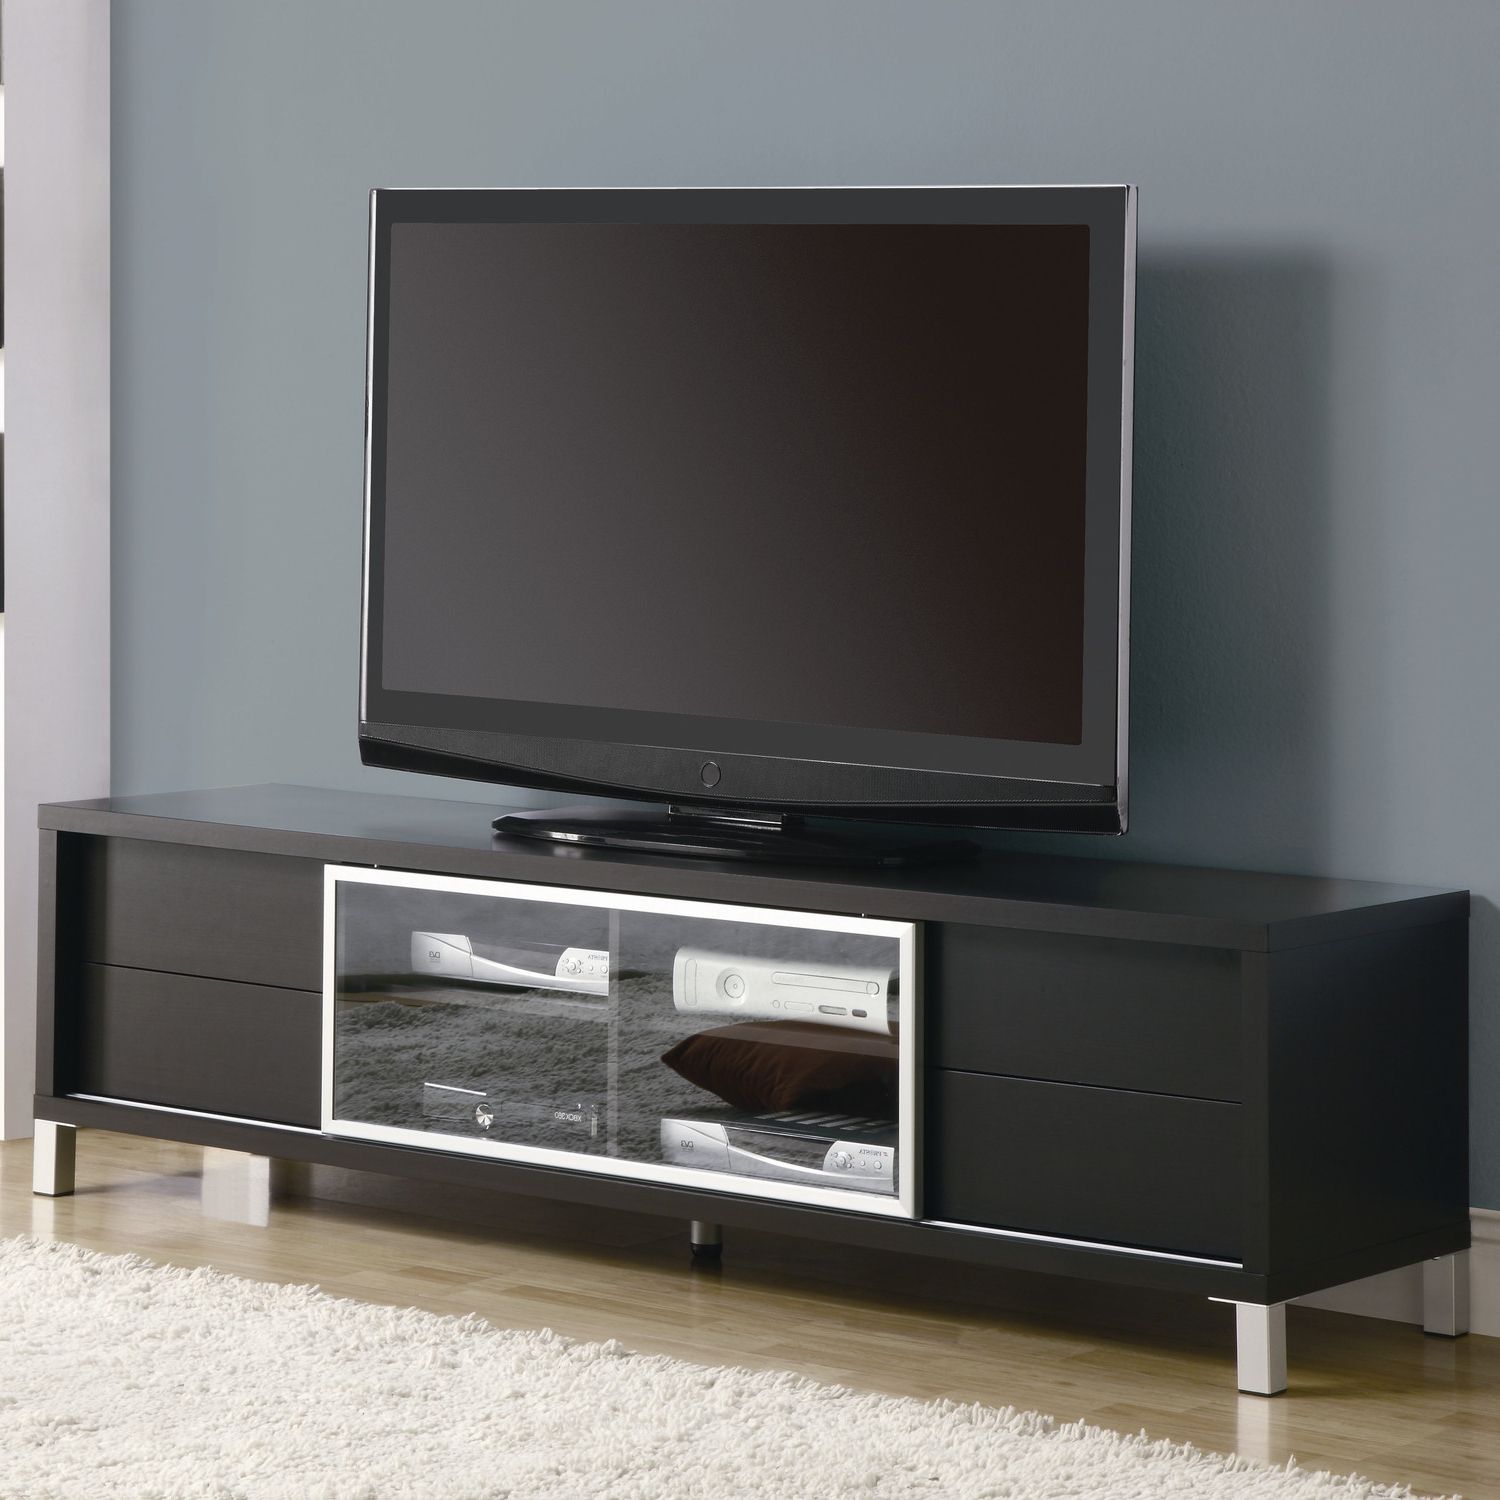 The Different Options In Types With Tv Stand Black Design – Furnish Within Best And Newest Unusual Tv Cabinets (Photo 14 of 20)